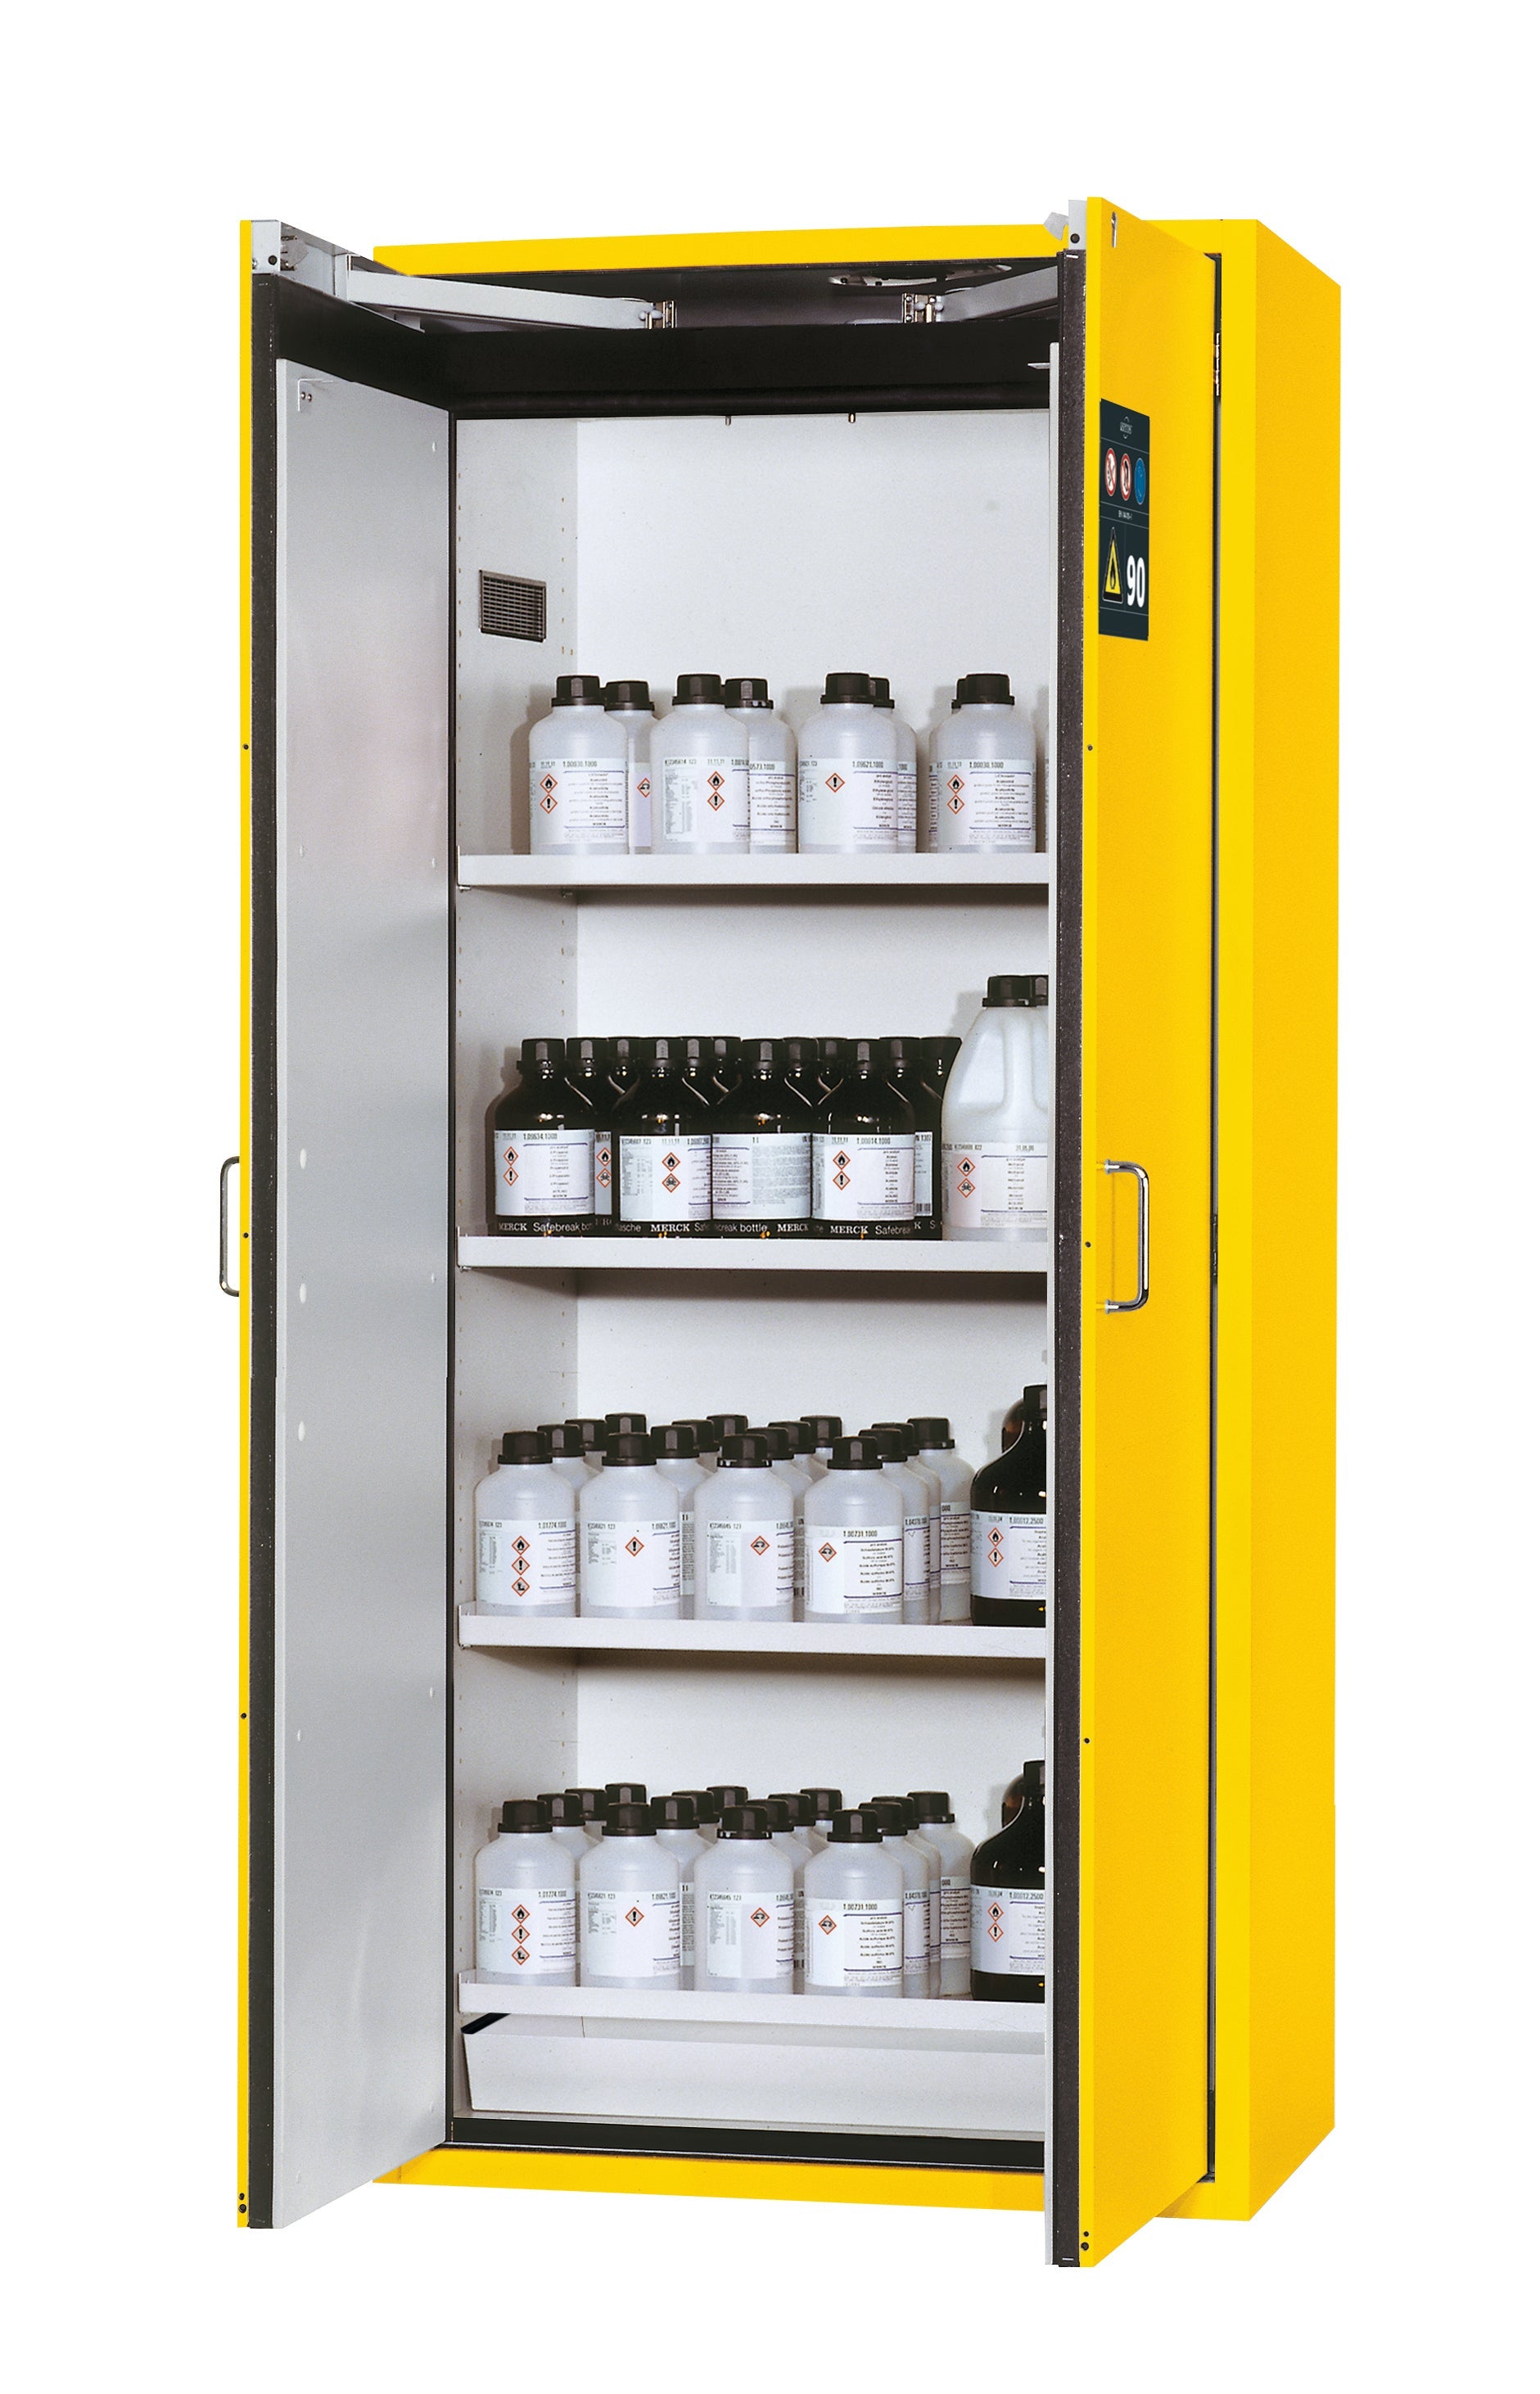 Type 90 safety cabinet S-CLASSIC-90 model S90.196.090 in safety yellow RAL 1004 with 4x standard shelves (sheet steel)